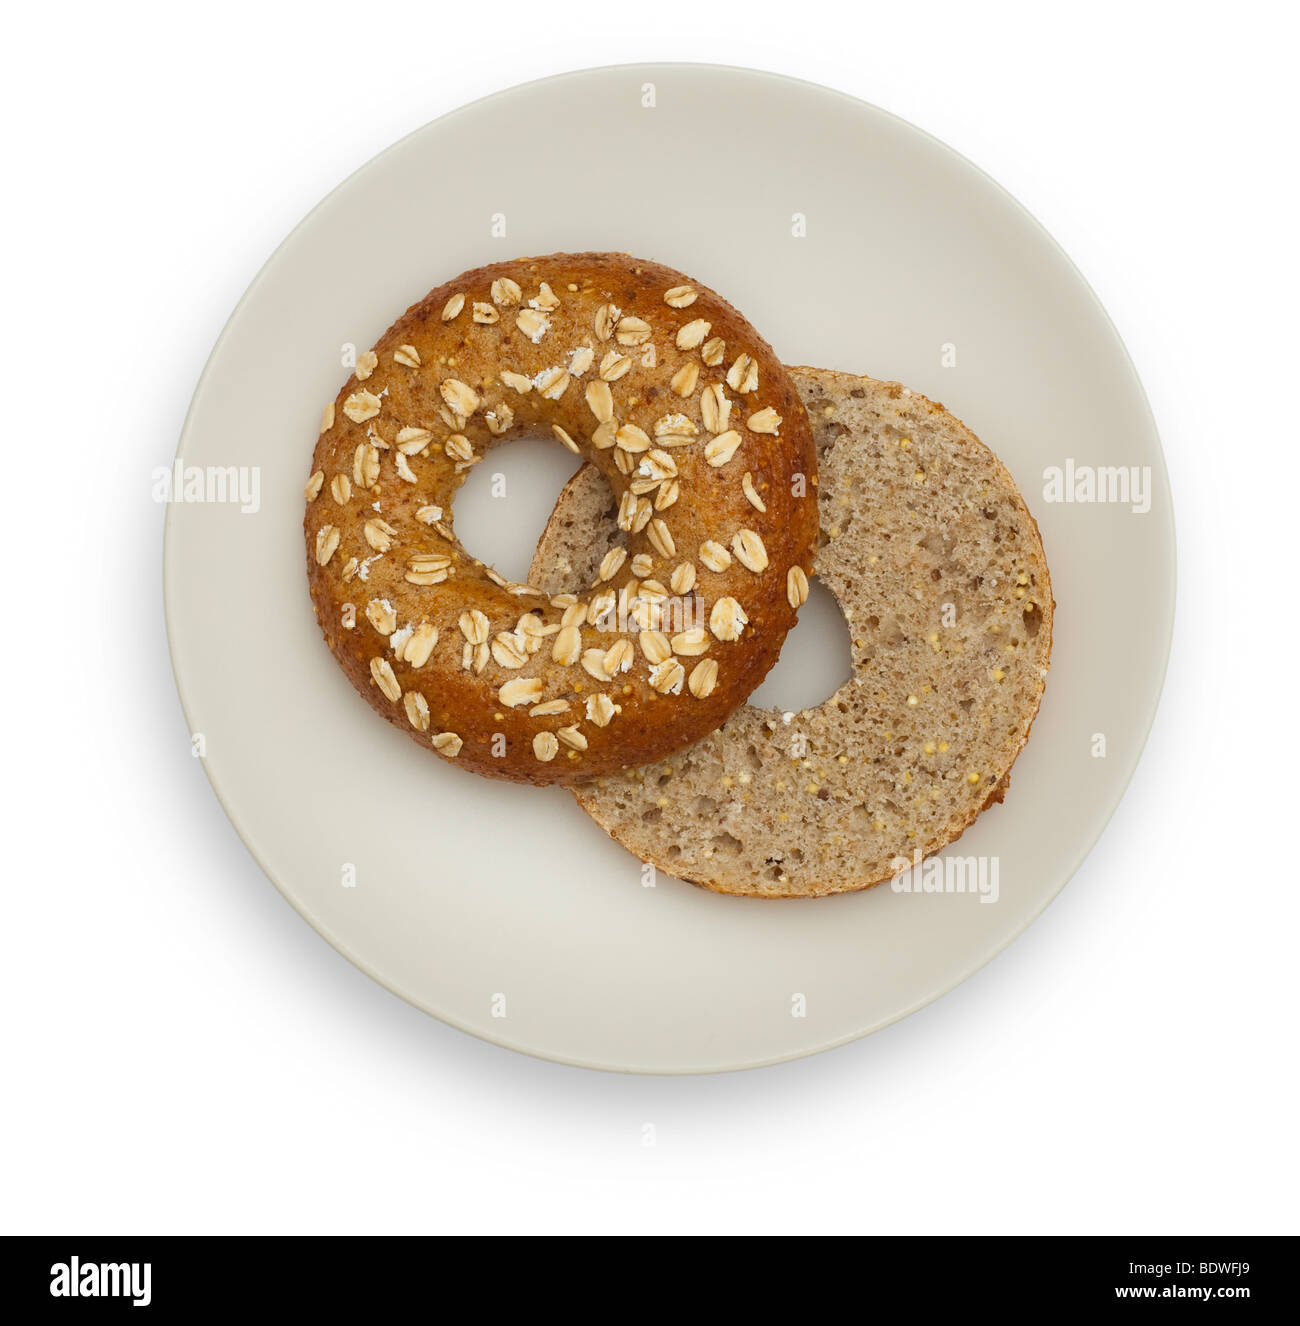 Two halfs of a Whole Grain Bagel on a White plate, isolated on white background. Stock Photo